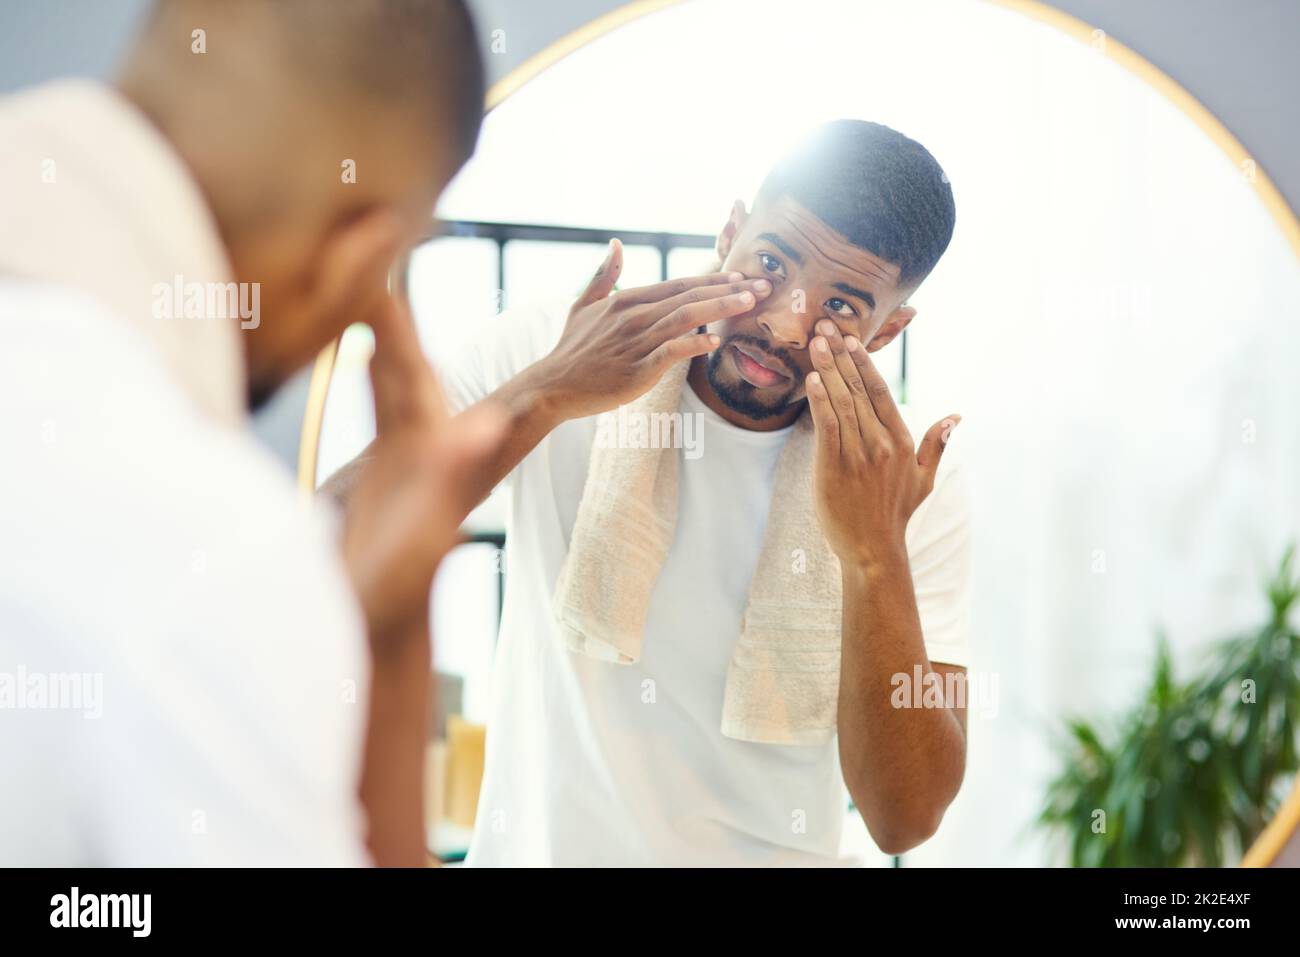 This face cream was well recommended. Young man applying face product in his bathroom mirror. Stock Photo